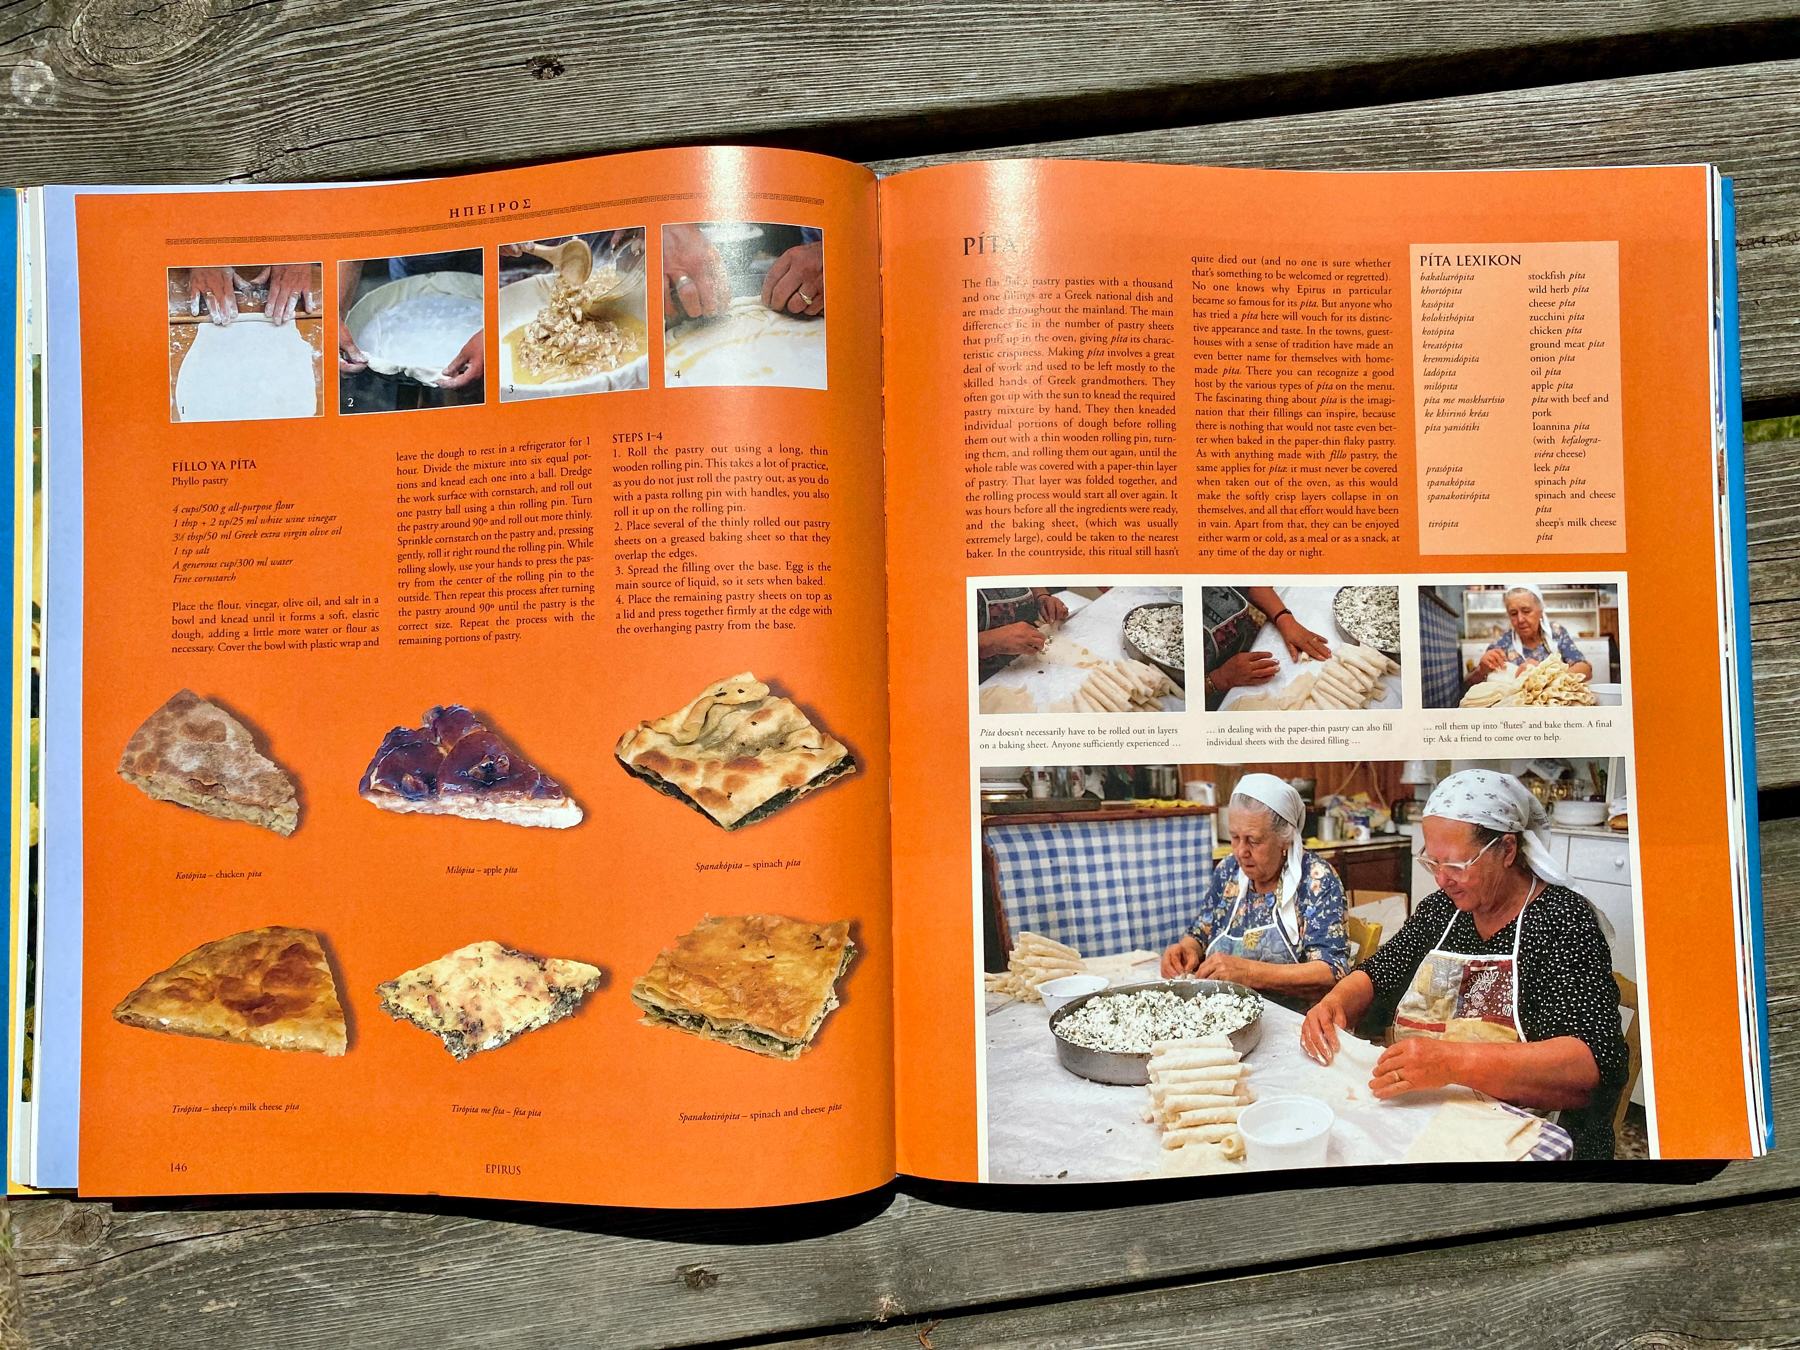 Open Greek cookery book showing a selection of pies and pita